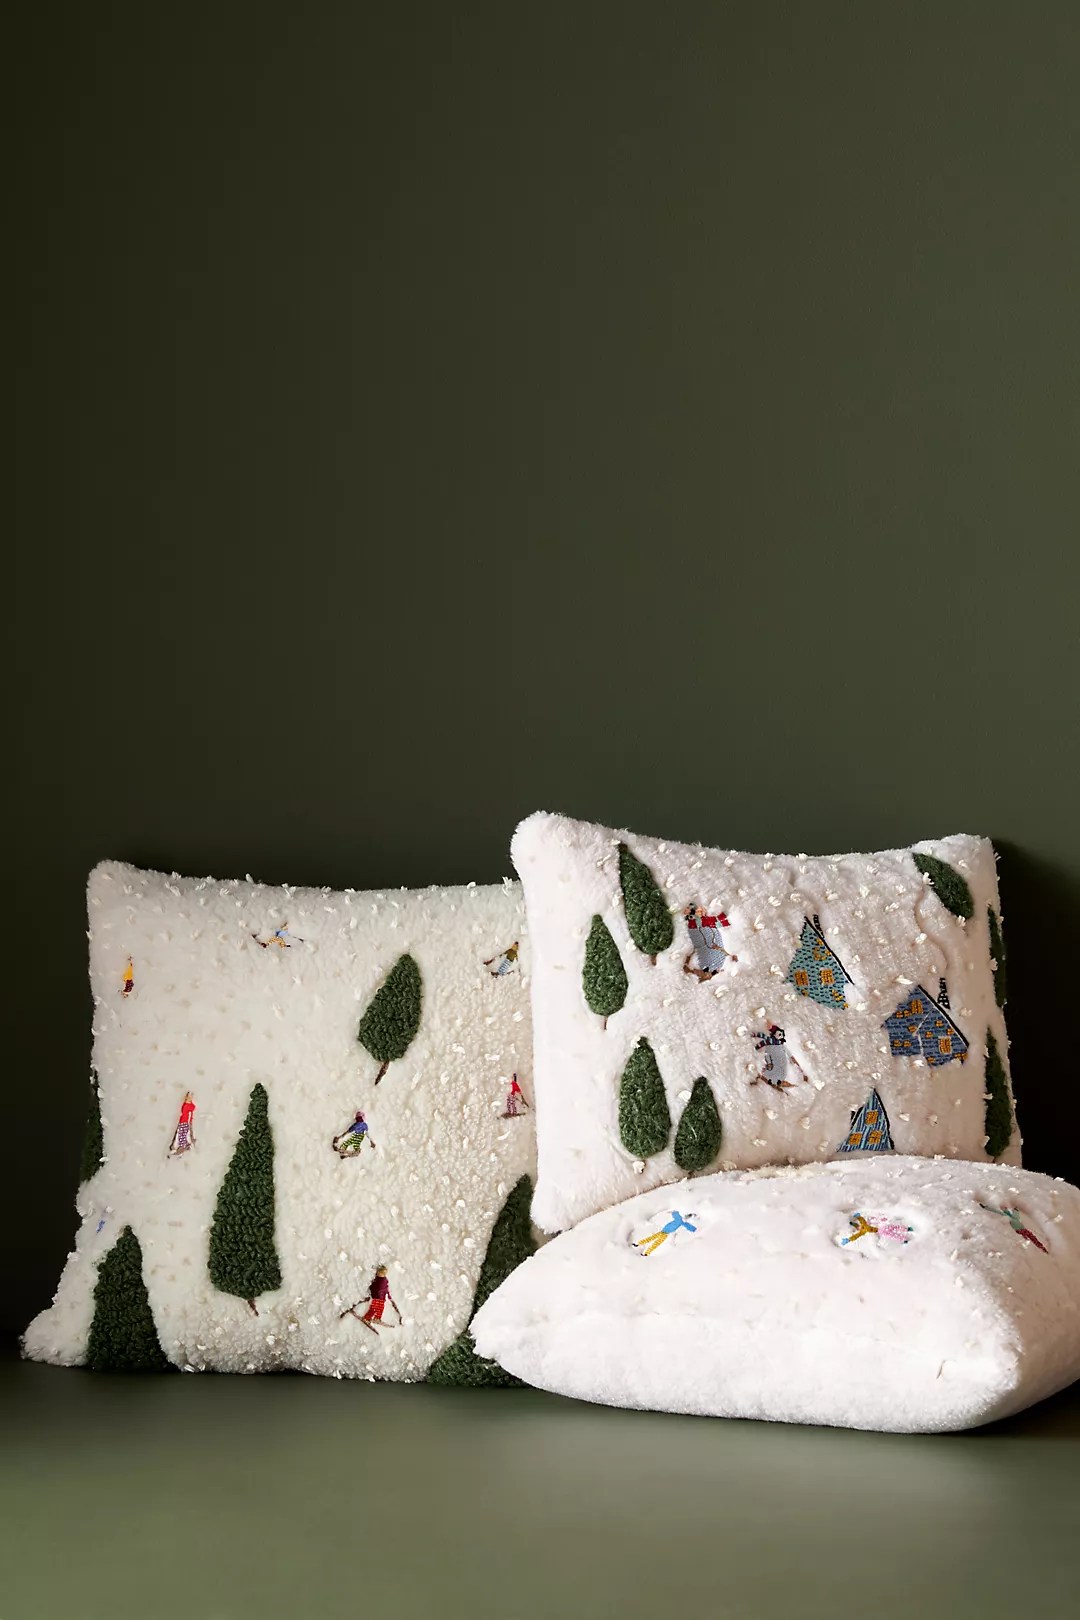 snow day pillows from the anthropologie black friday sale